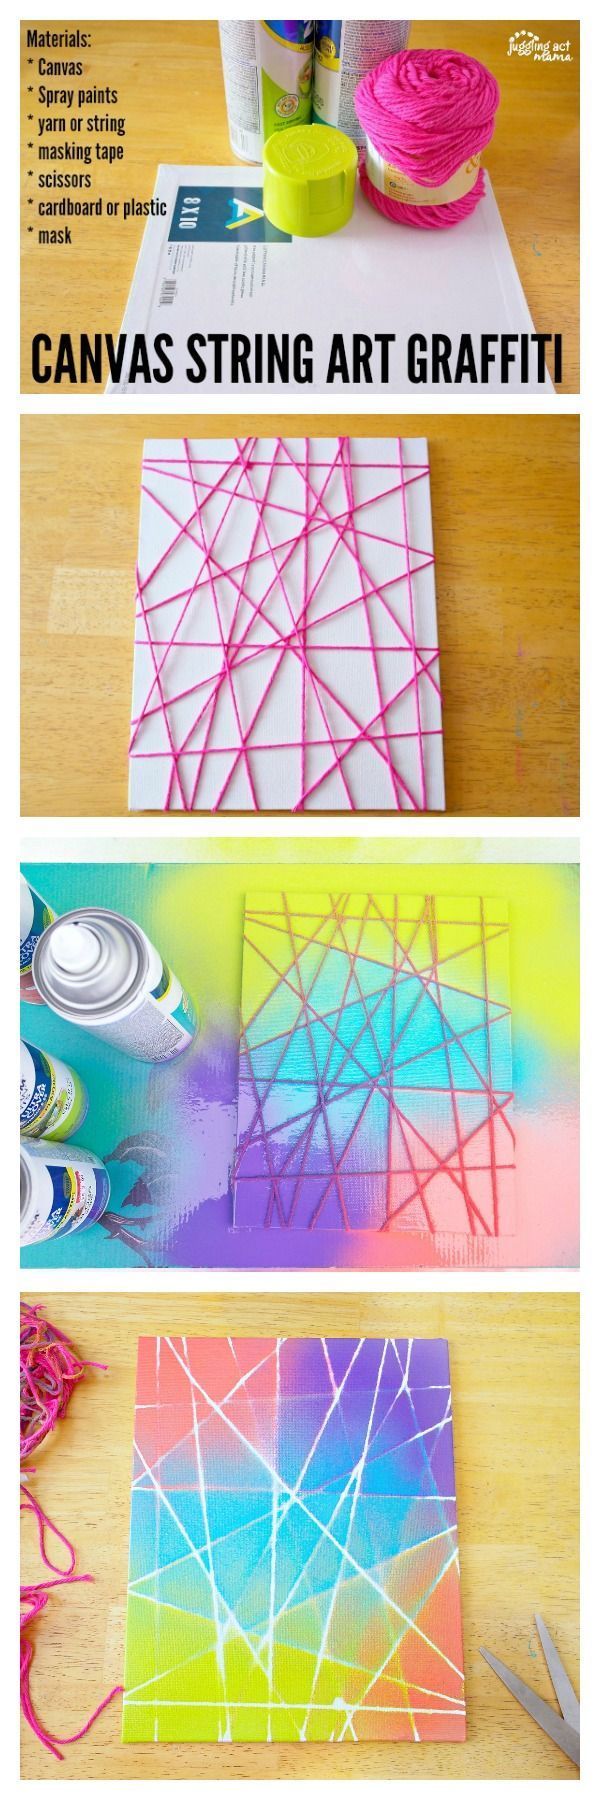 This Canvas String Art Graffiti project is fun for kids and adults alike. While this is a spray paint project, you can use